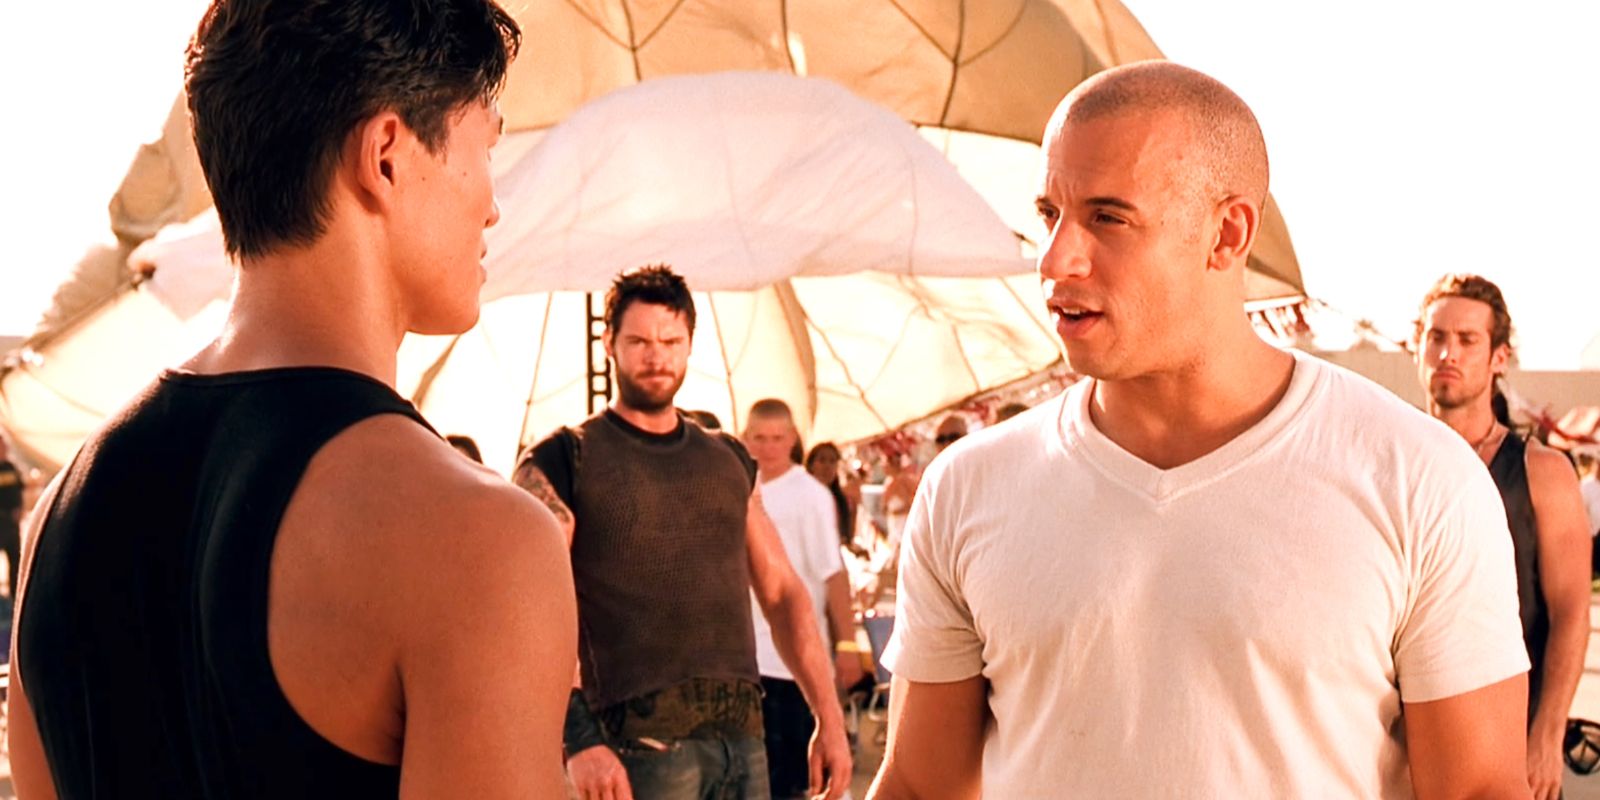 Dominic Toretto talking to Johnny Tran in front of crew in The Fast and The Furious